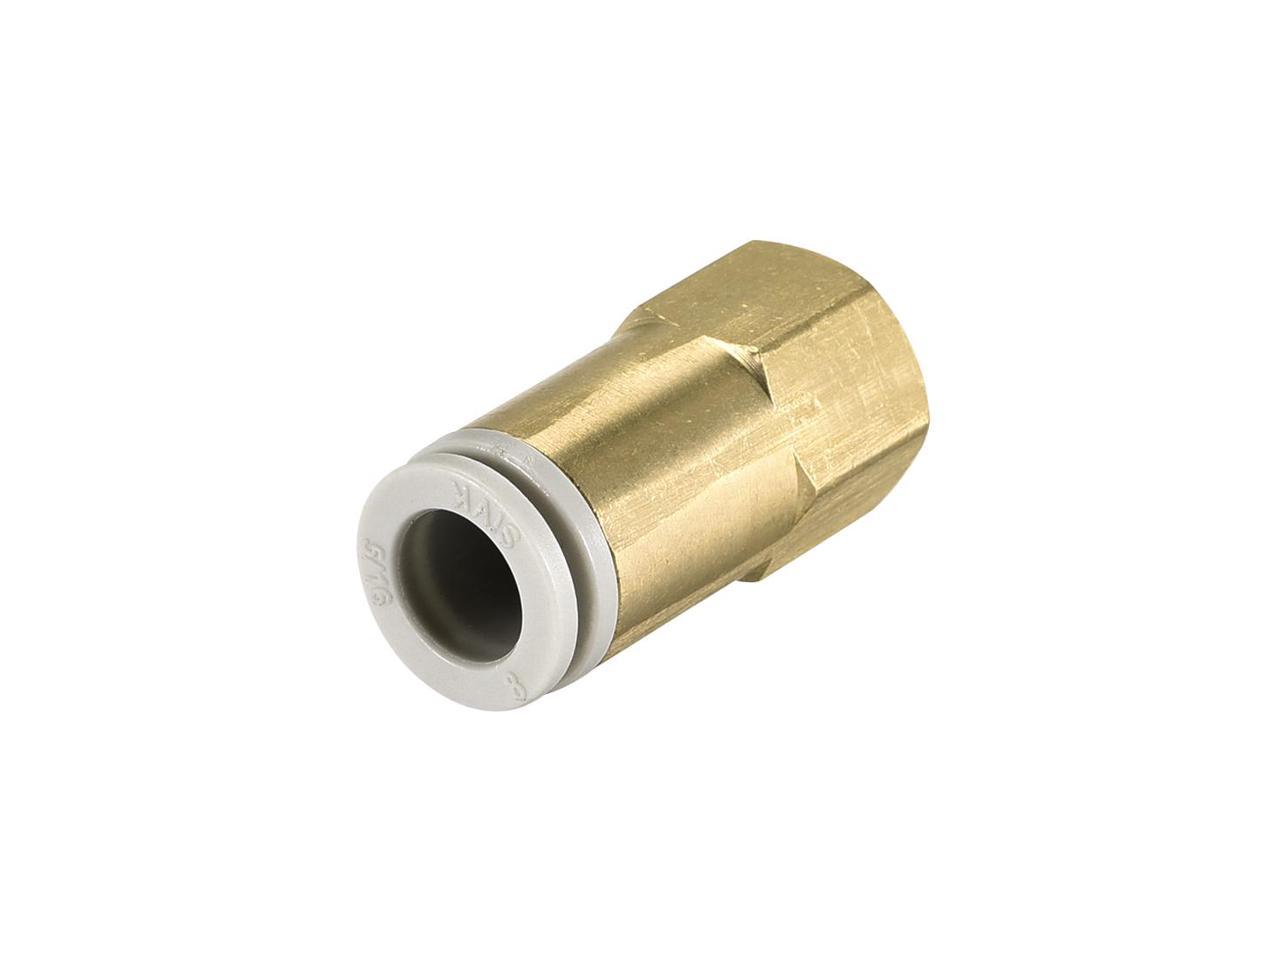 Push to Connect Tube Mount Adapter 8mm Tube OD X 1/8 NPT Female Straight Pneumatic Connector Pipe Connection 